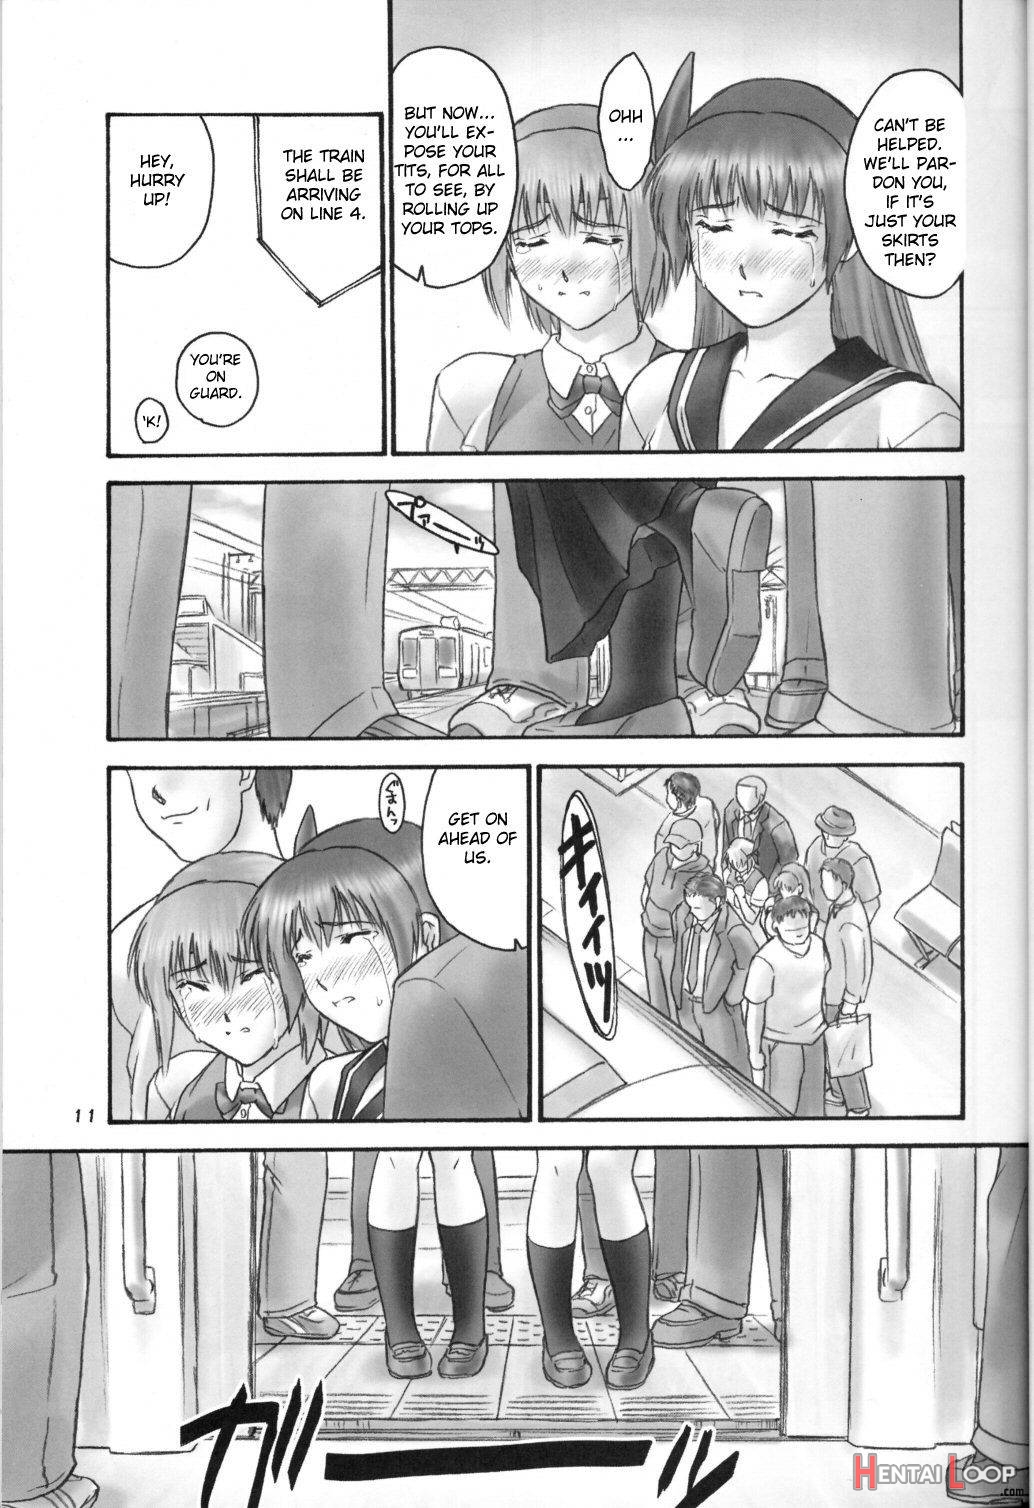 Experiments.02 (orz.) page 9